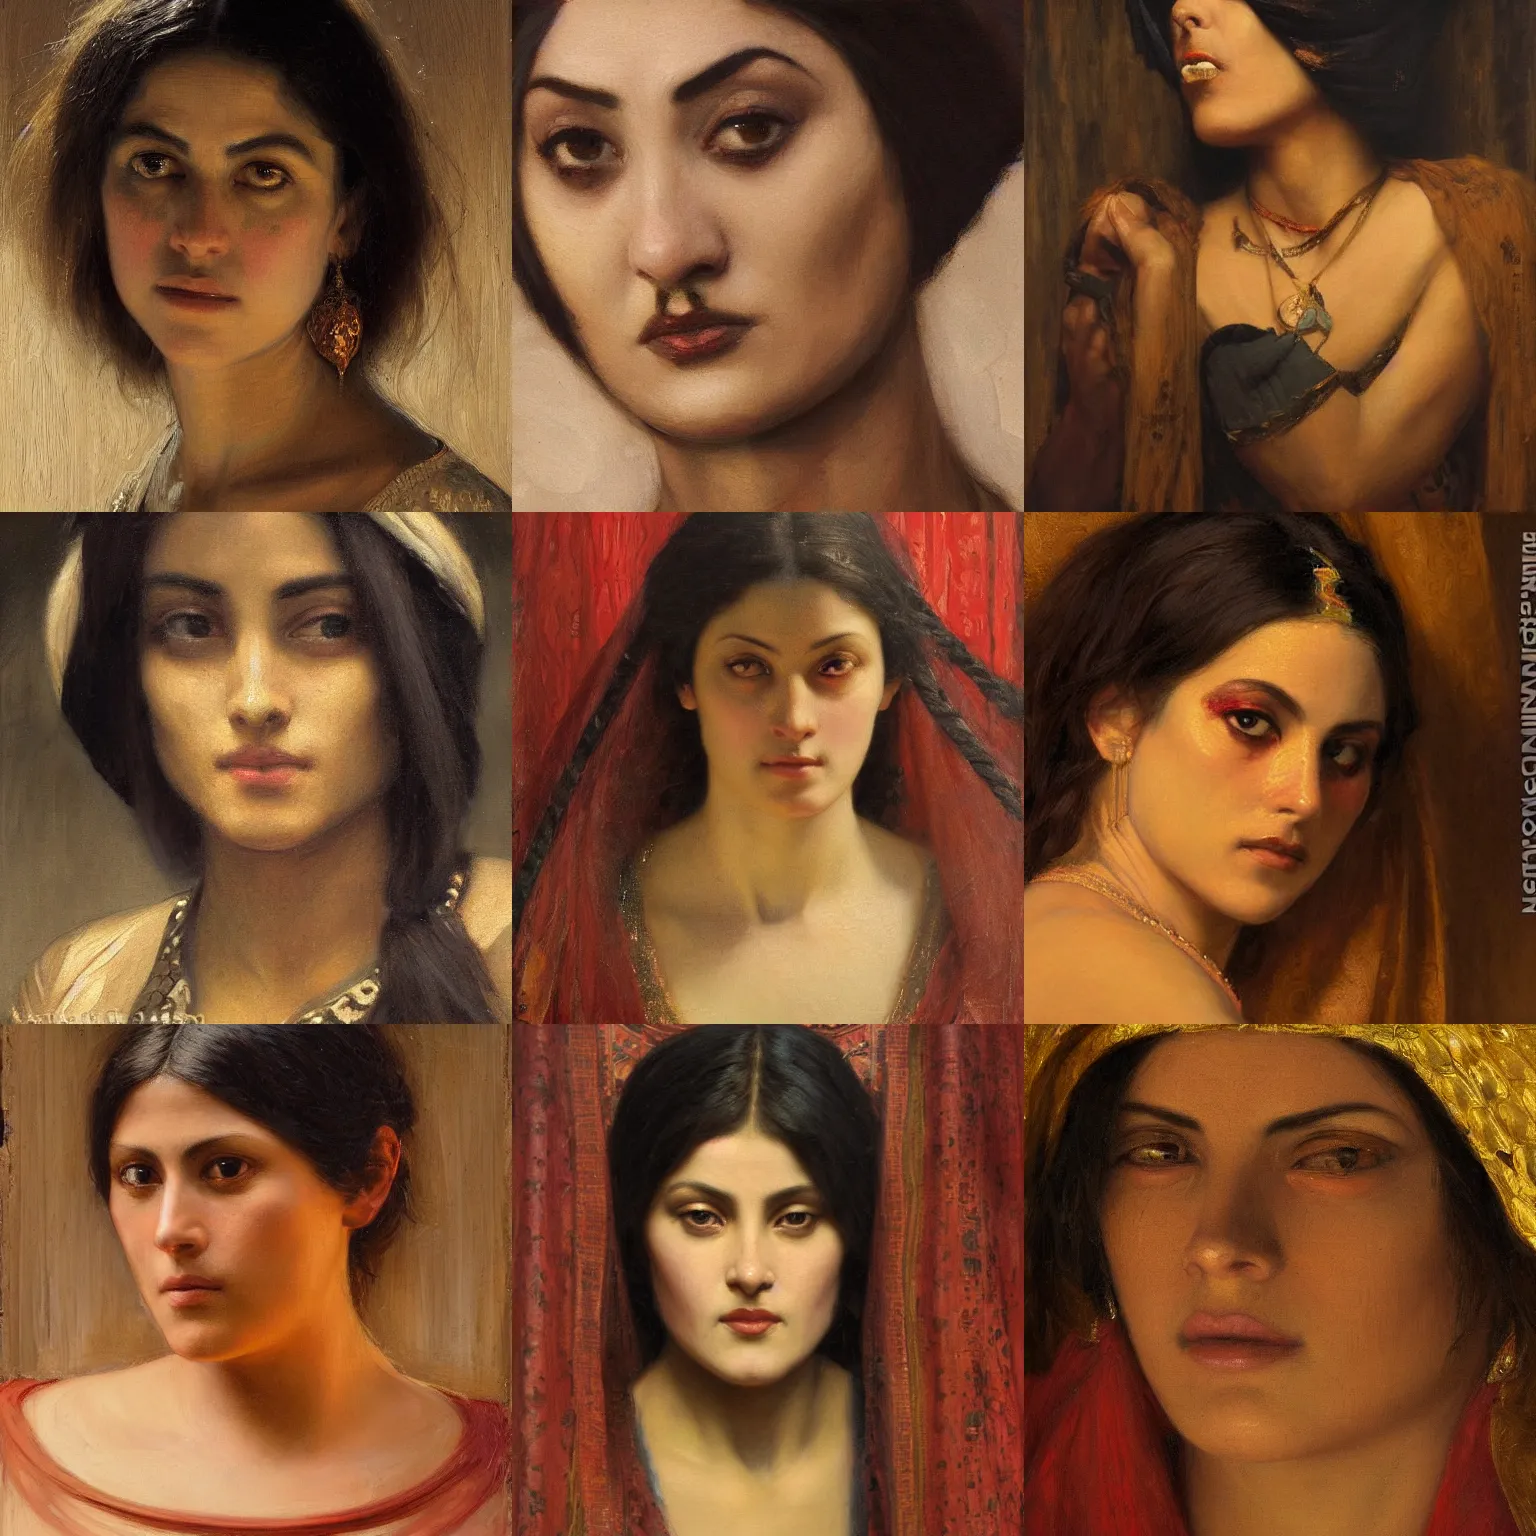 Prompt: orientalism painting female criminal face detail by edwin longsden long and theodore ralli and nasreddine dinet and adam styka, masterful intricate art. oil on canvas, excellent lighting, high detail 8 k